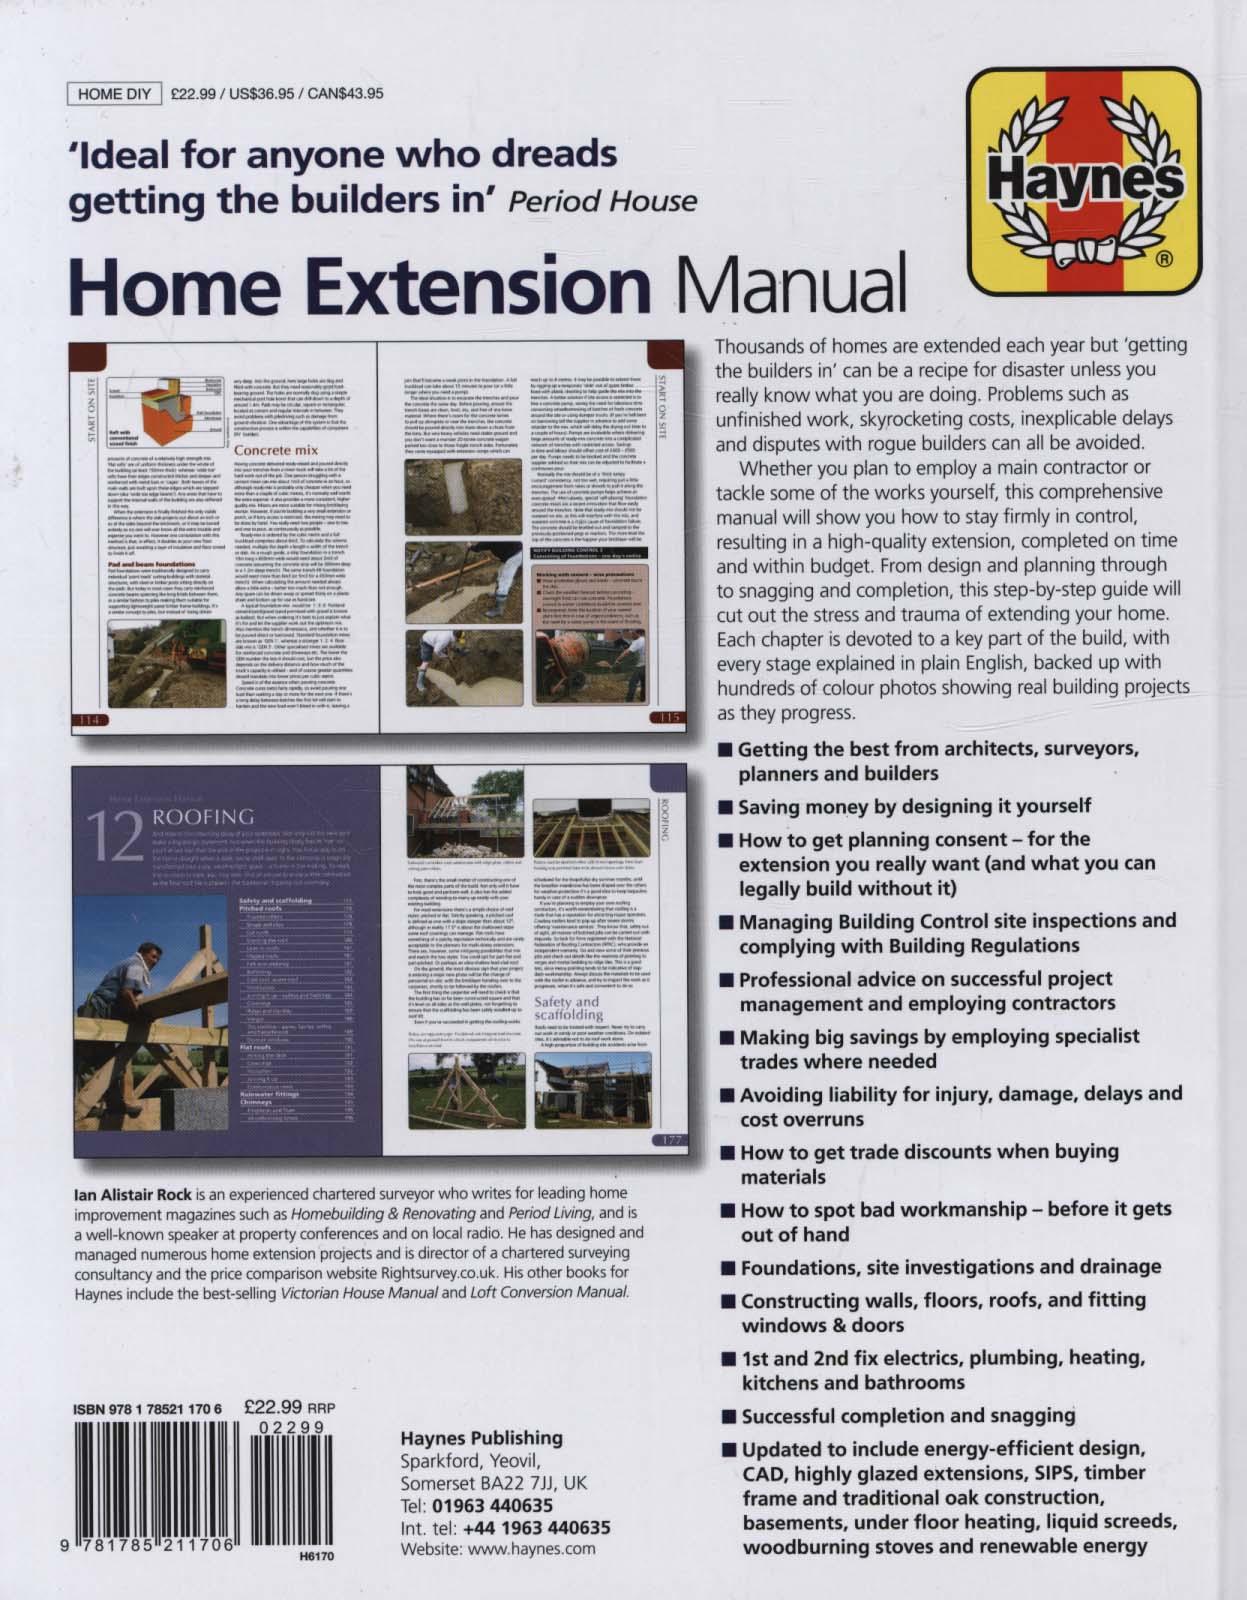 Home Extension Manual